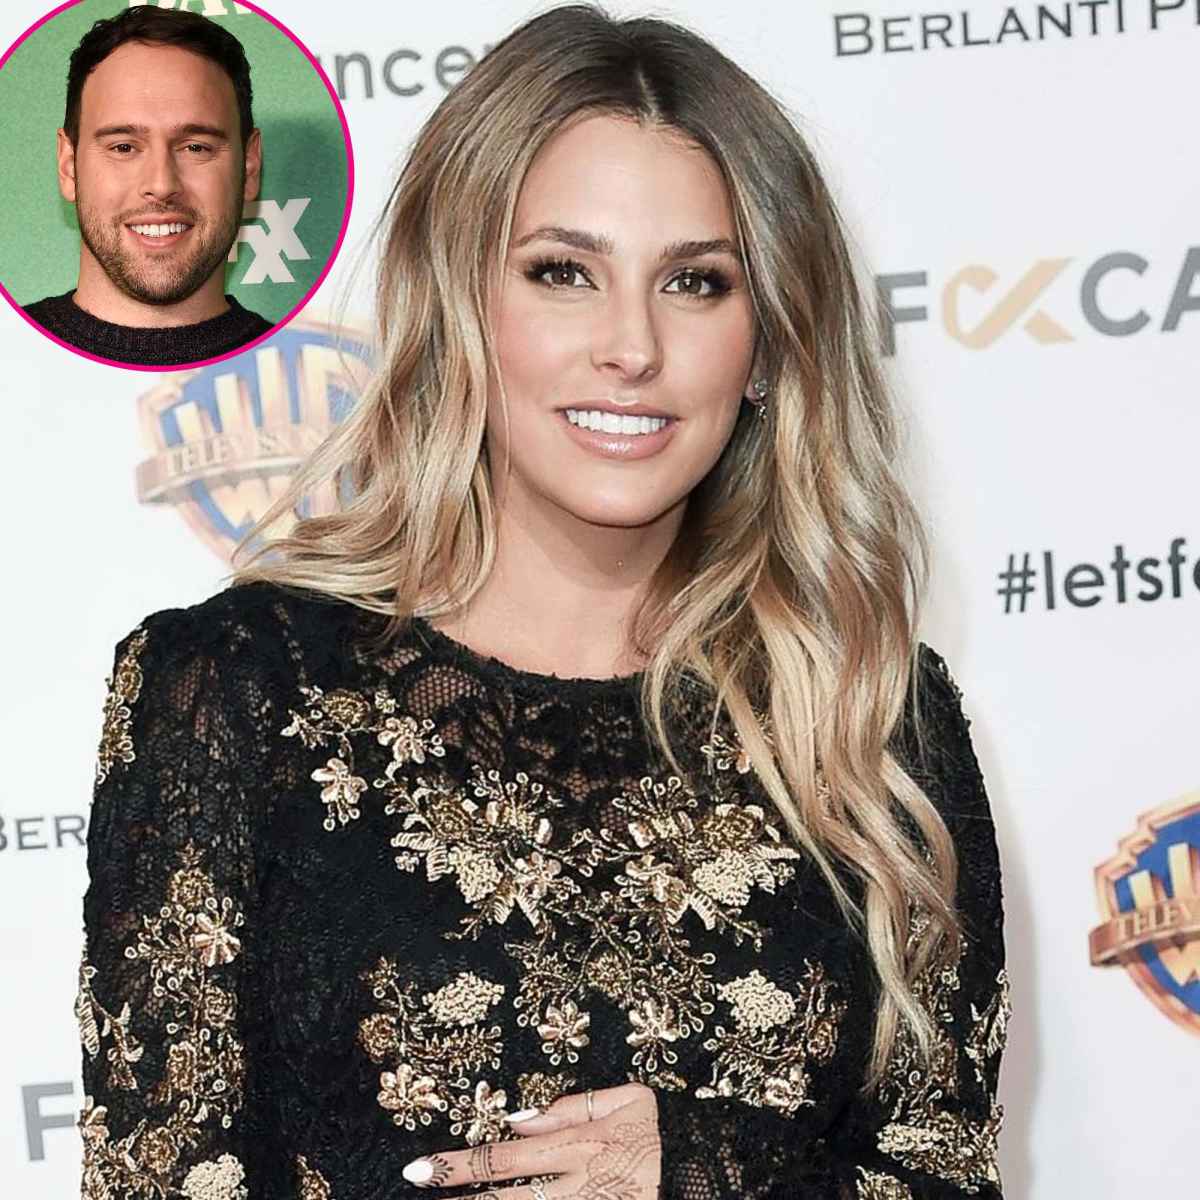 Yael Cohen: 5 Things Know After Scooter Braun Split